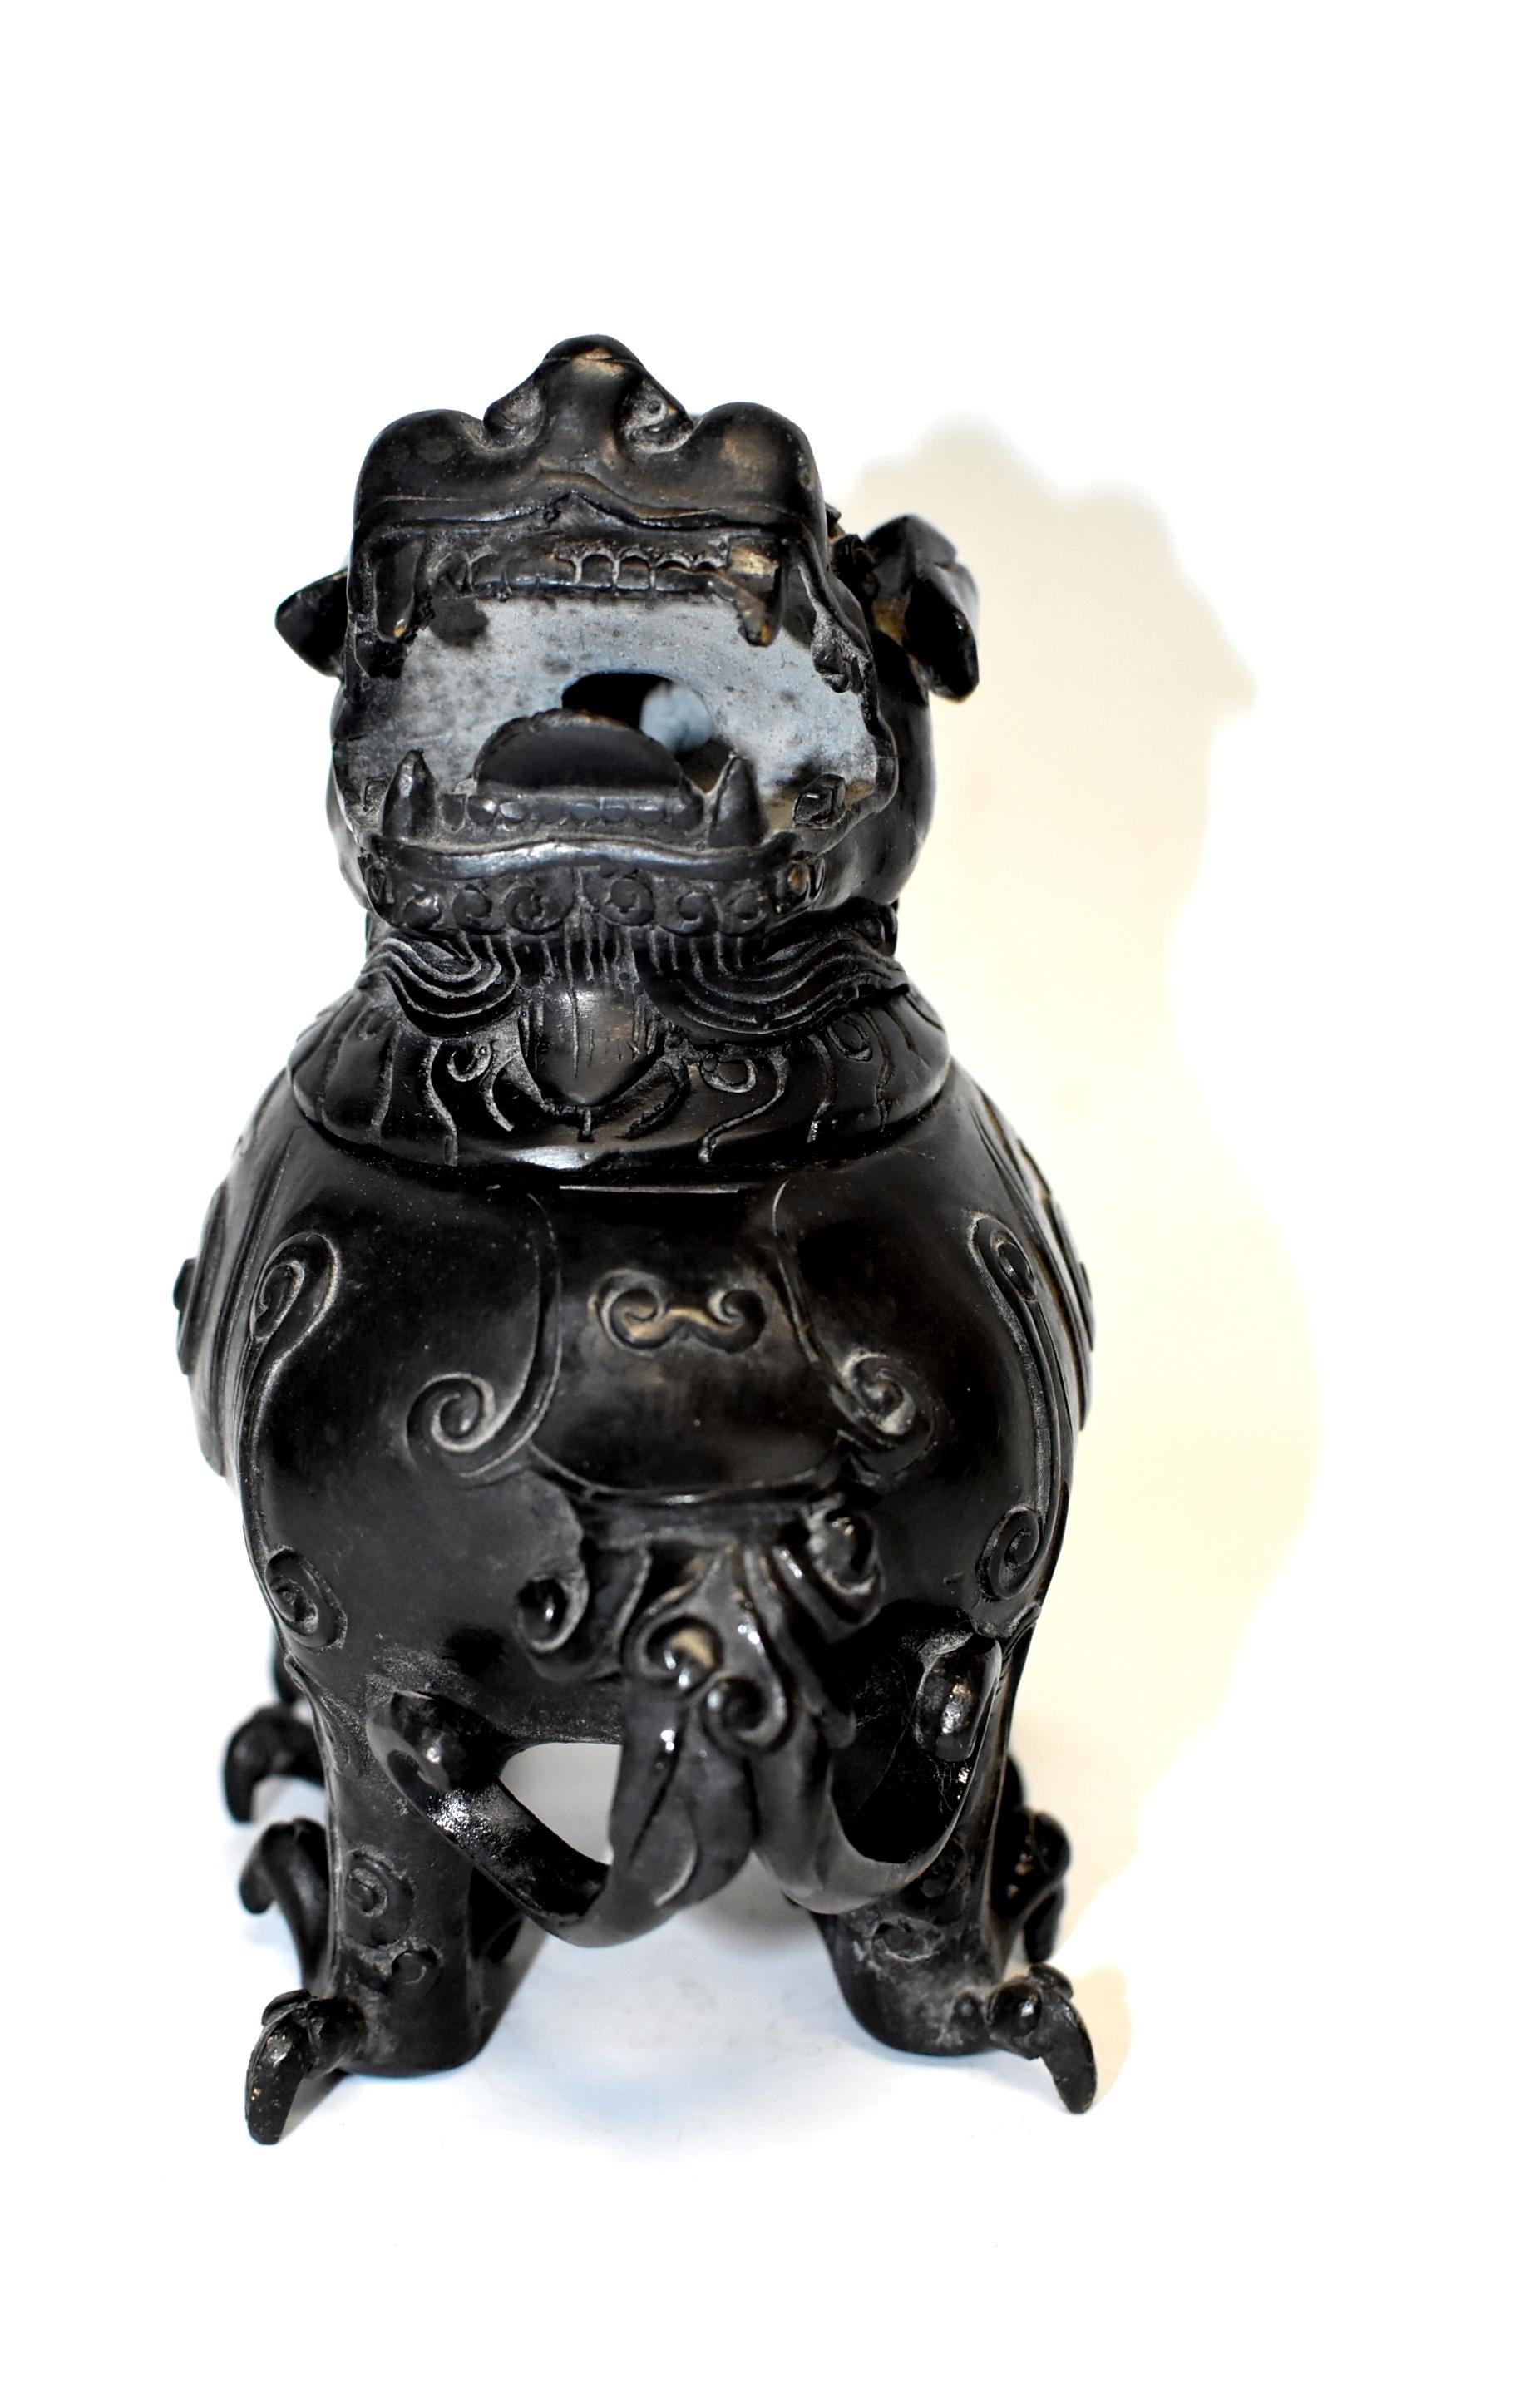 An unique beast form incense burner in an ancient design. The beast's head makes the lid while its 4 legs and paws stabilize the pot. Romantic, exotic scrolls decorate the body. Open mouth allows the perfumed air to escape. Refined craftsmanship.